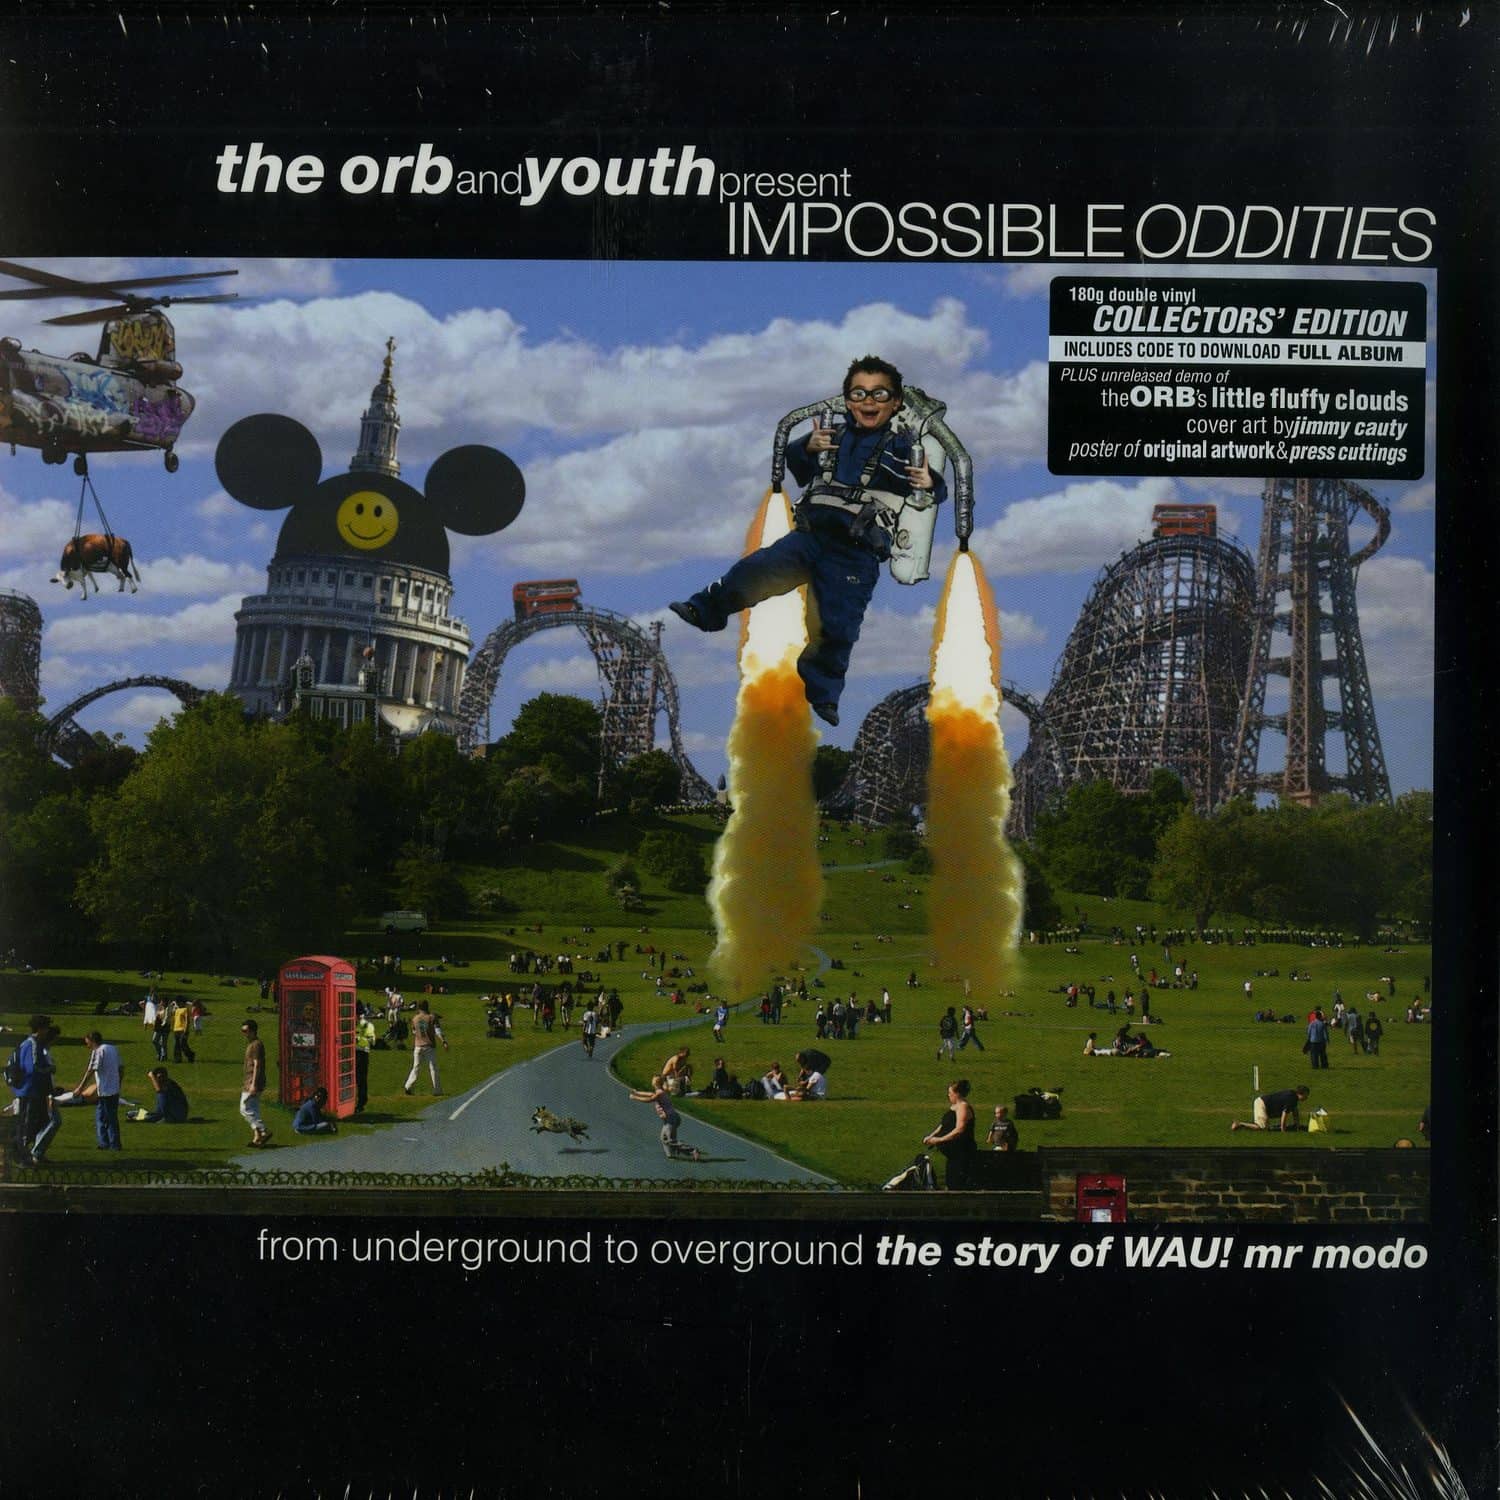 The Orb & Youth pres. - IMPOSSIBLE ODDITIES 